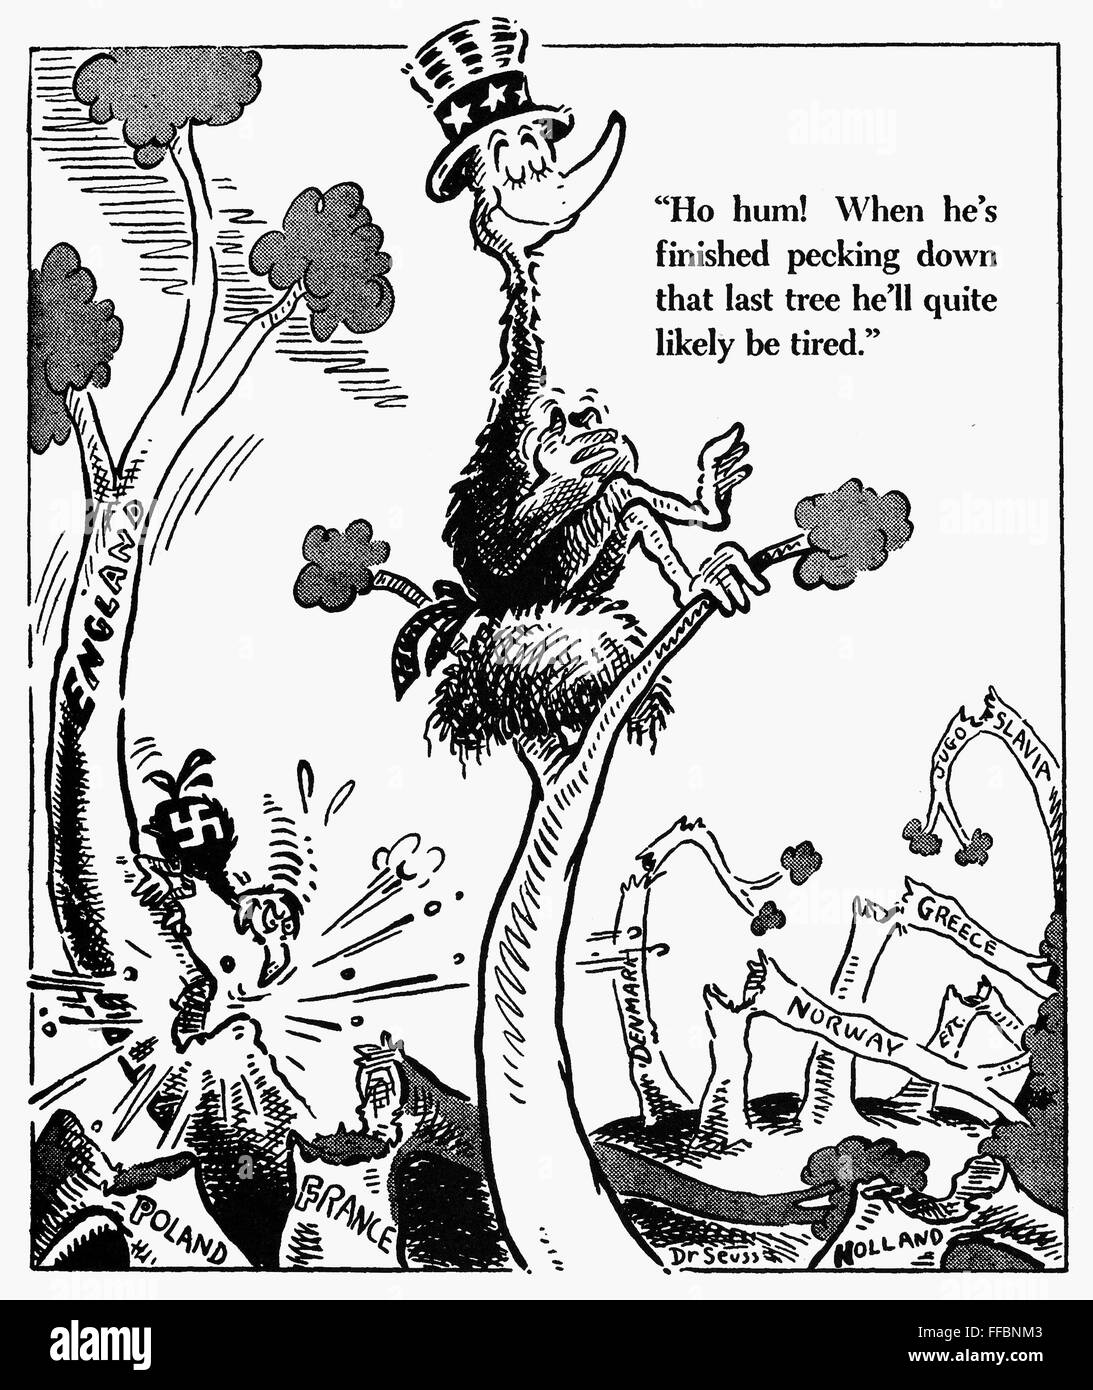 CARTOON: WORLD WAR II. /n'Ho hum! When he's finished pecking down that last  tree he'll quite likely be tired.' American cartoon by Dr. Seuss (Theodor  Geisel) for 'PM,' 22 May 1941, critical